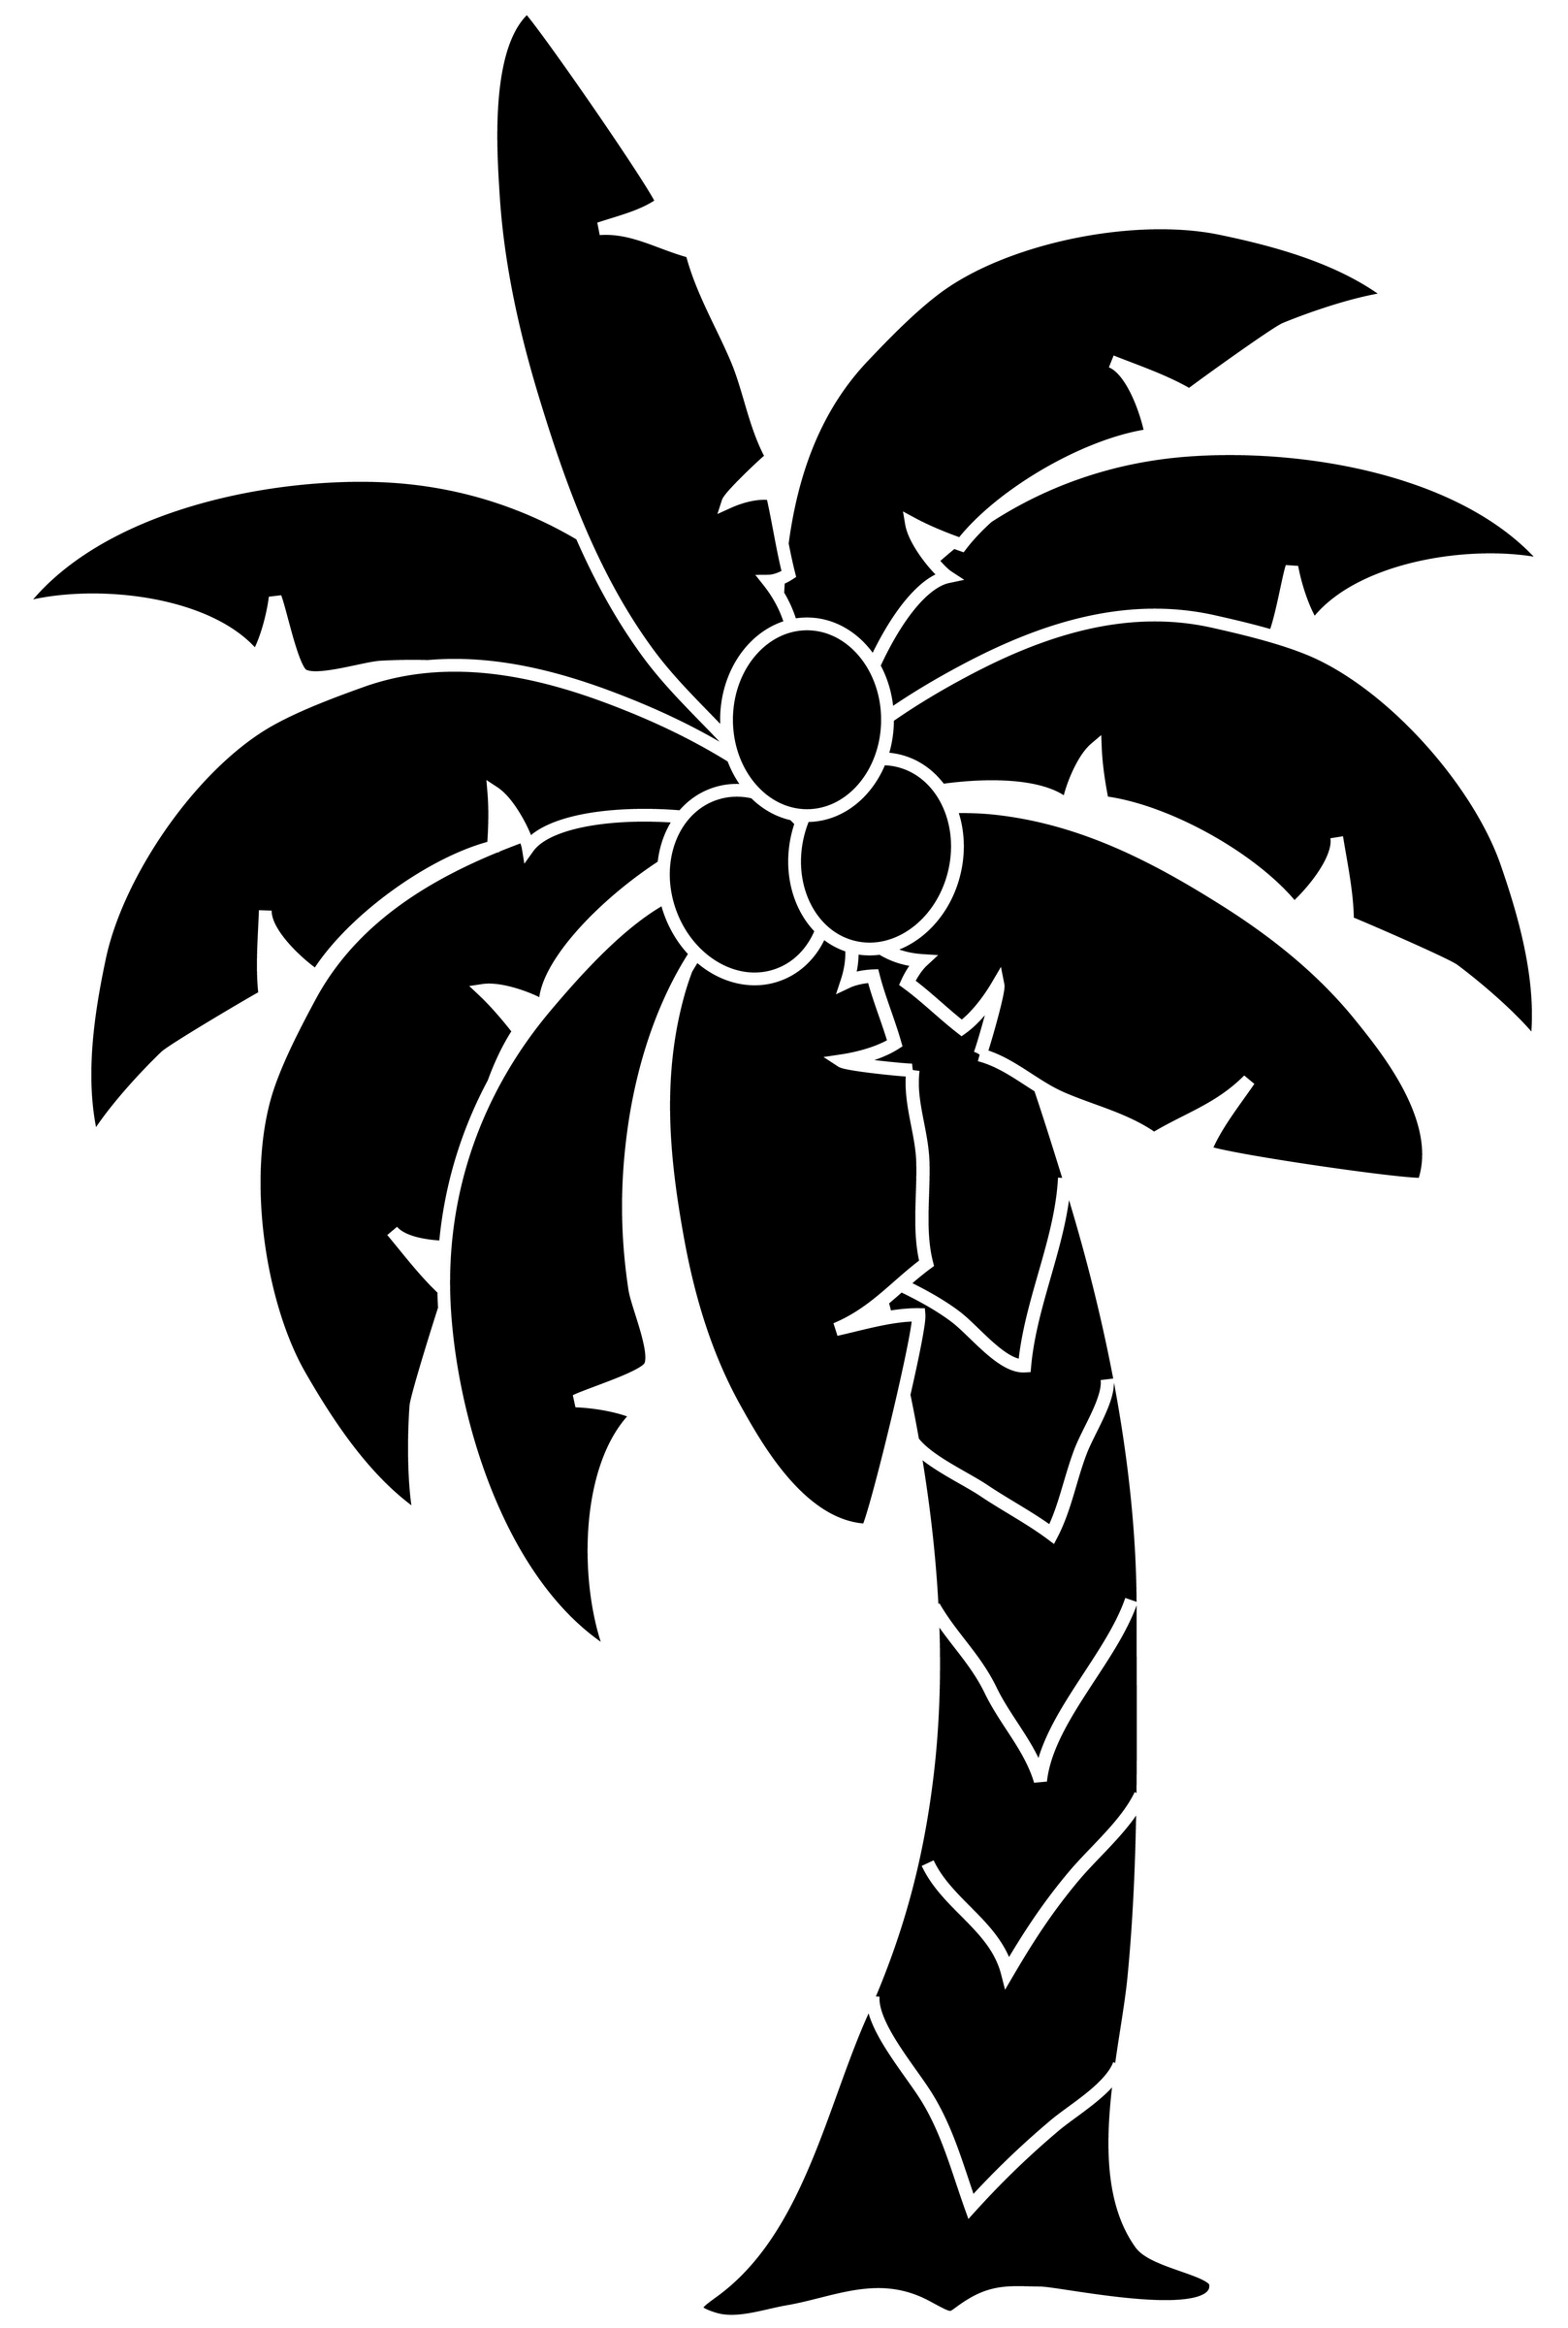 Tropical palm trees clipart free clip art images image 7